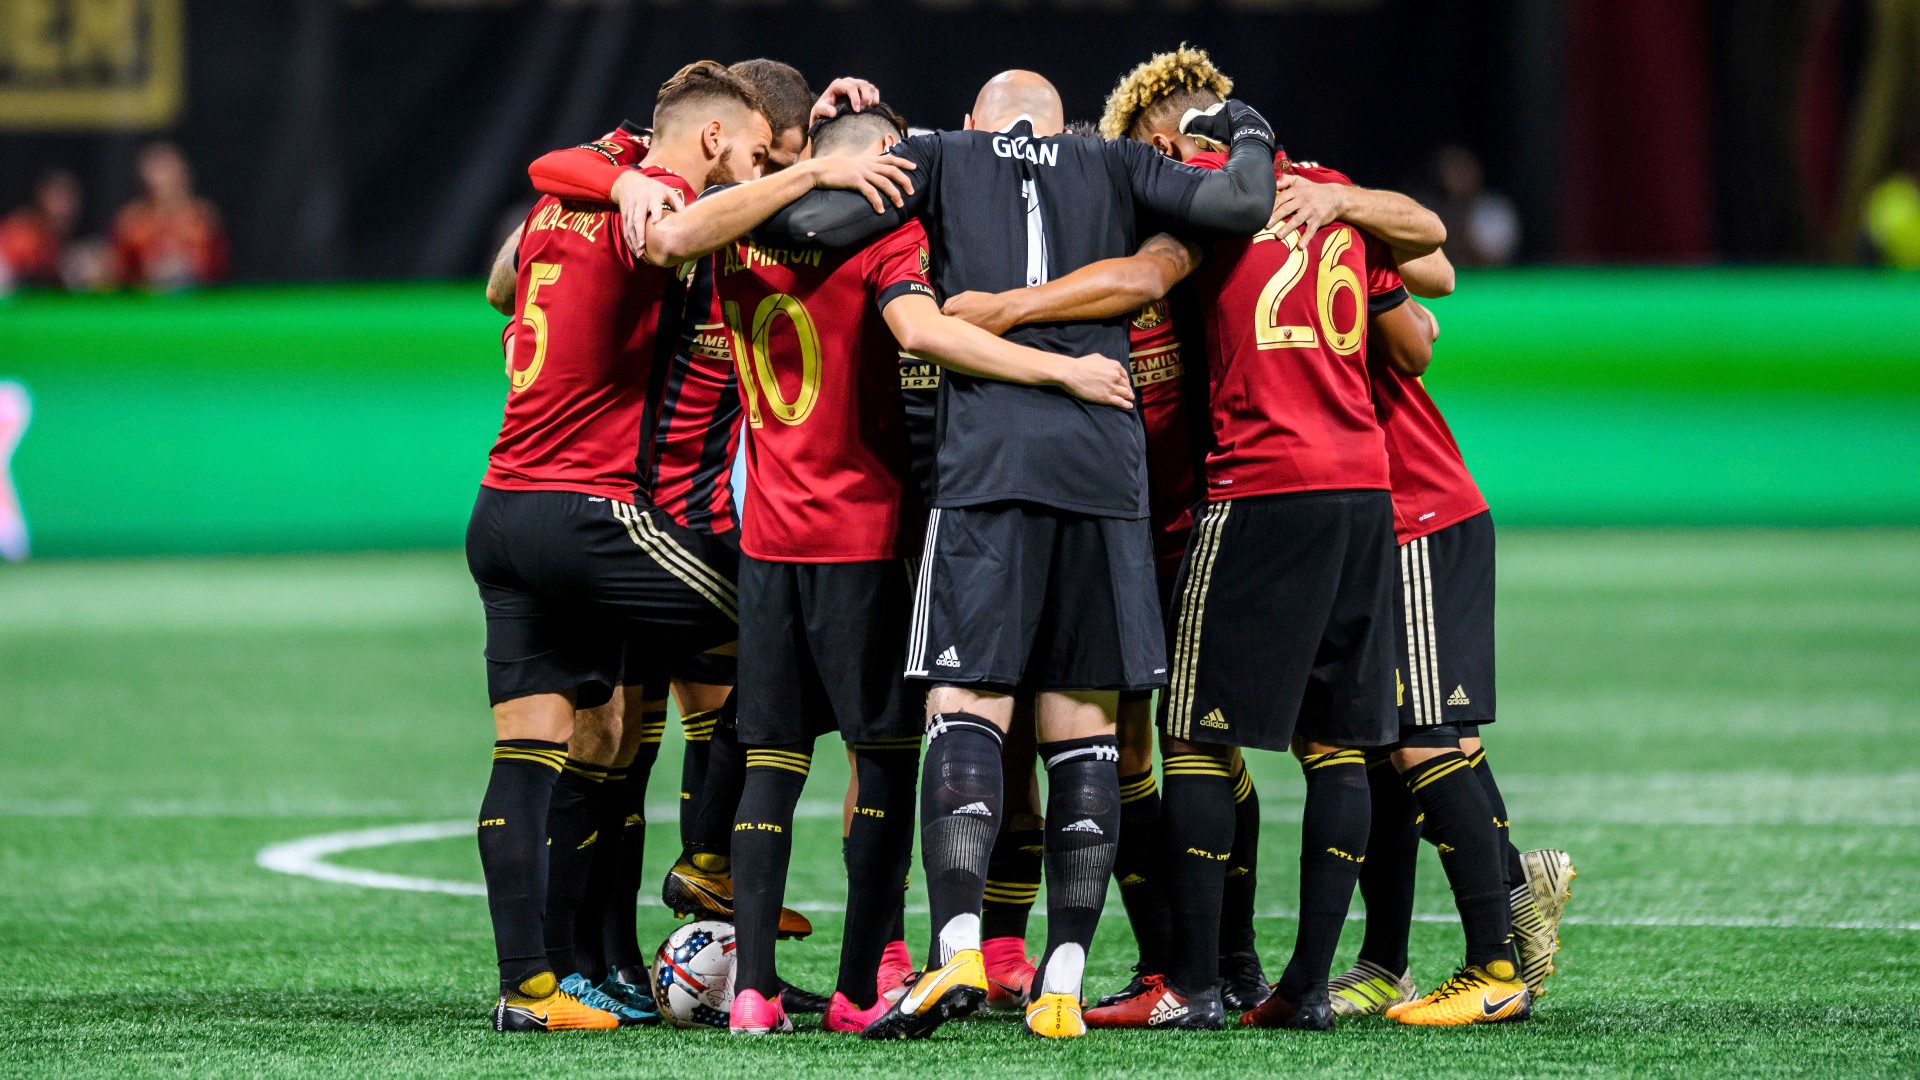 Every training session for Atlanta United has been pivotal heading into 2023 considering how many changes have been made to the roster.